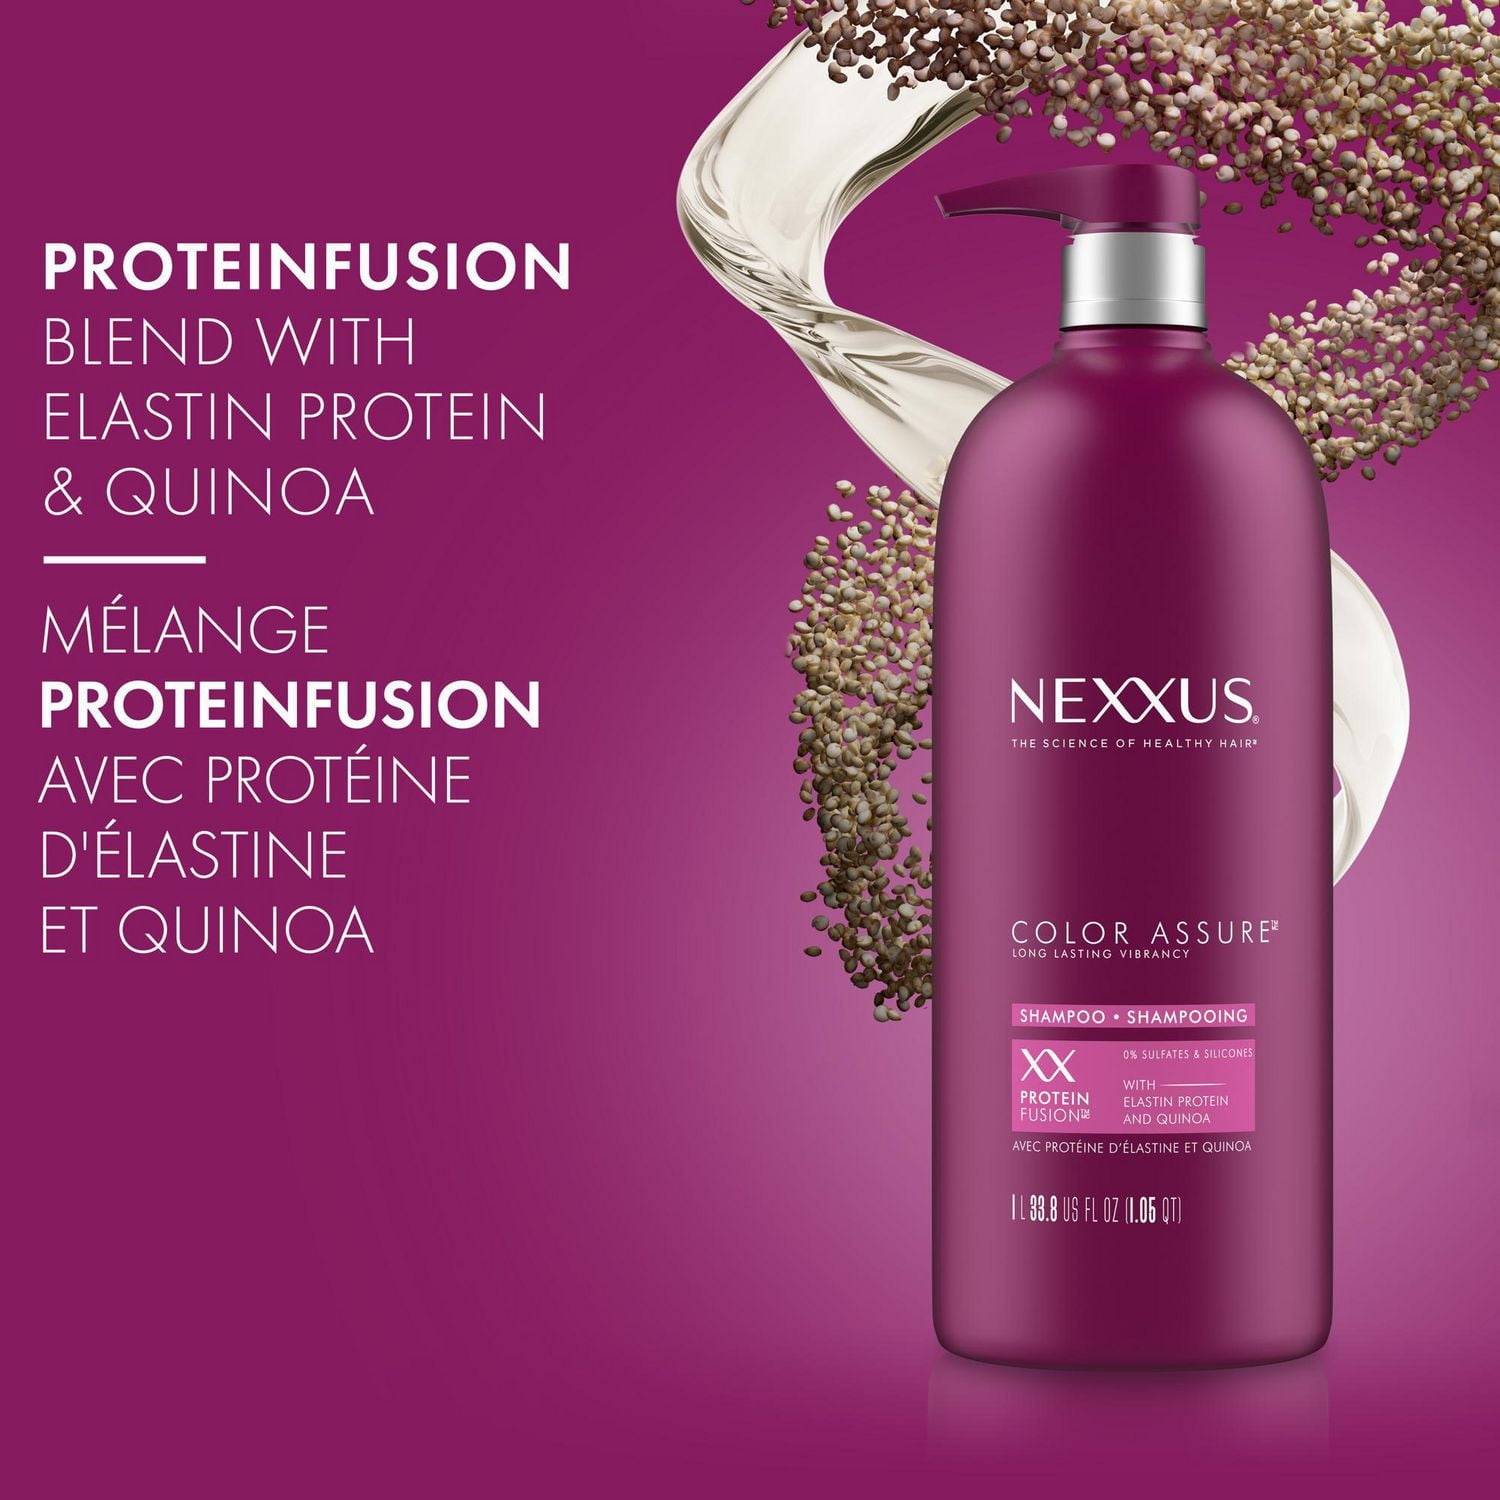 Facts About Curly Hair Protein & Chemistry - Nexxus US